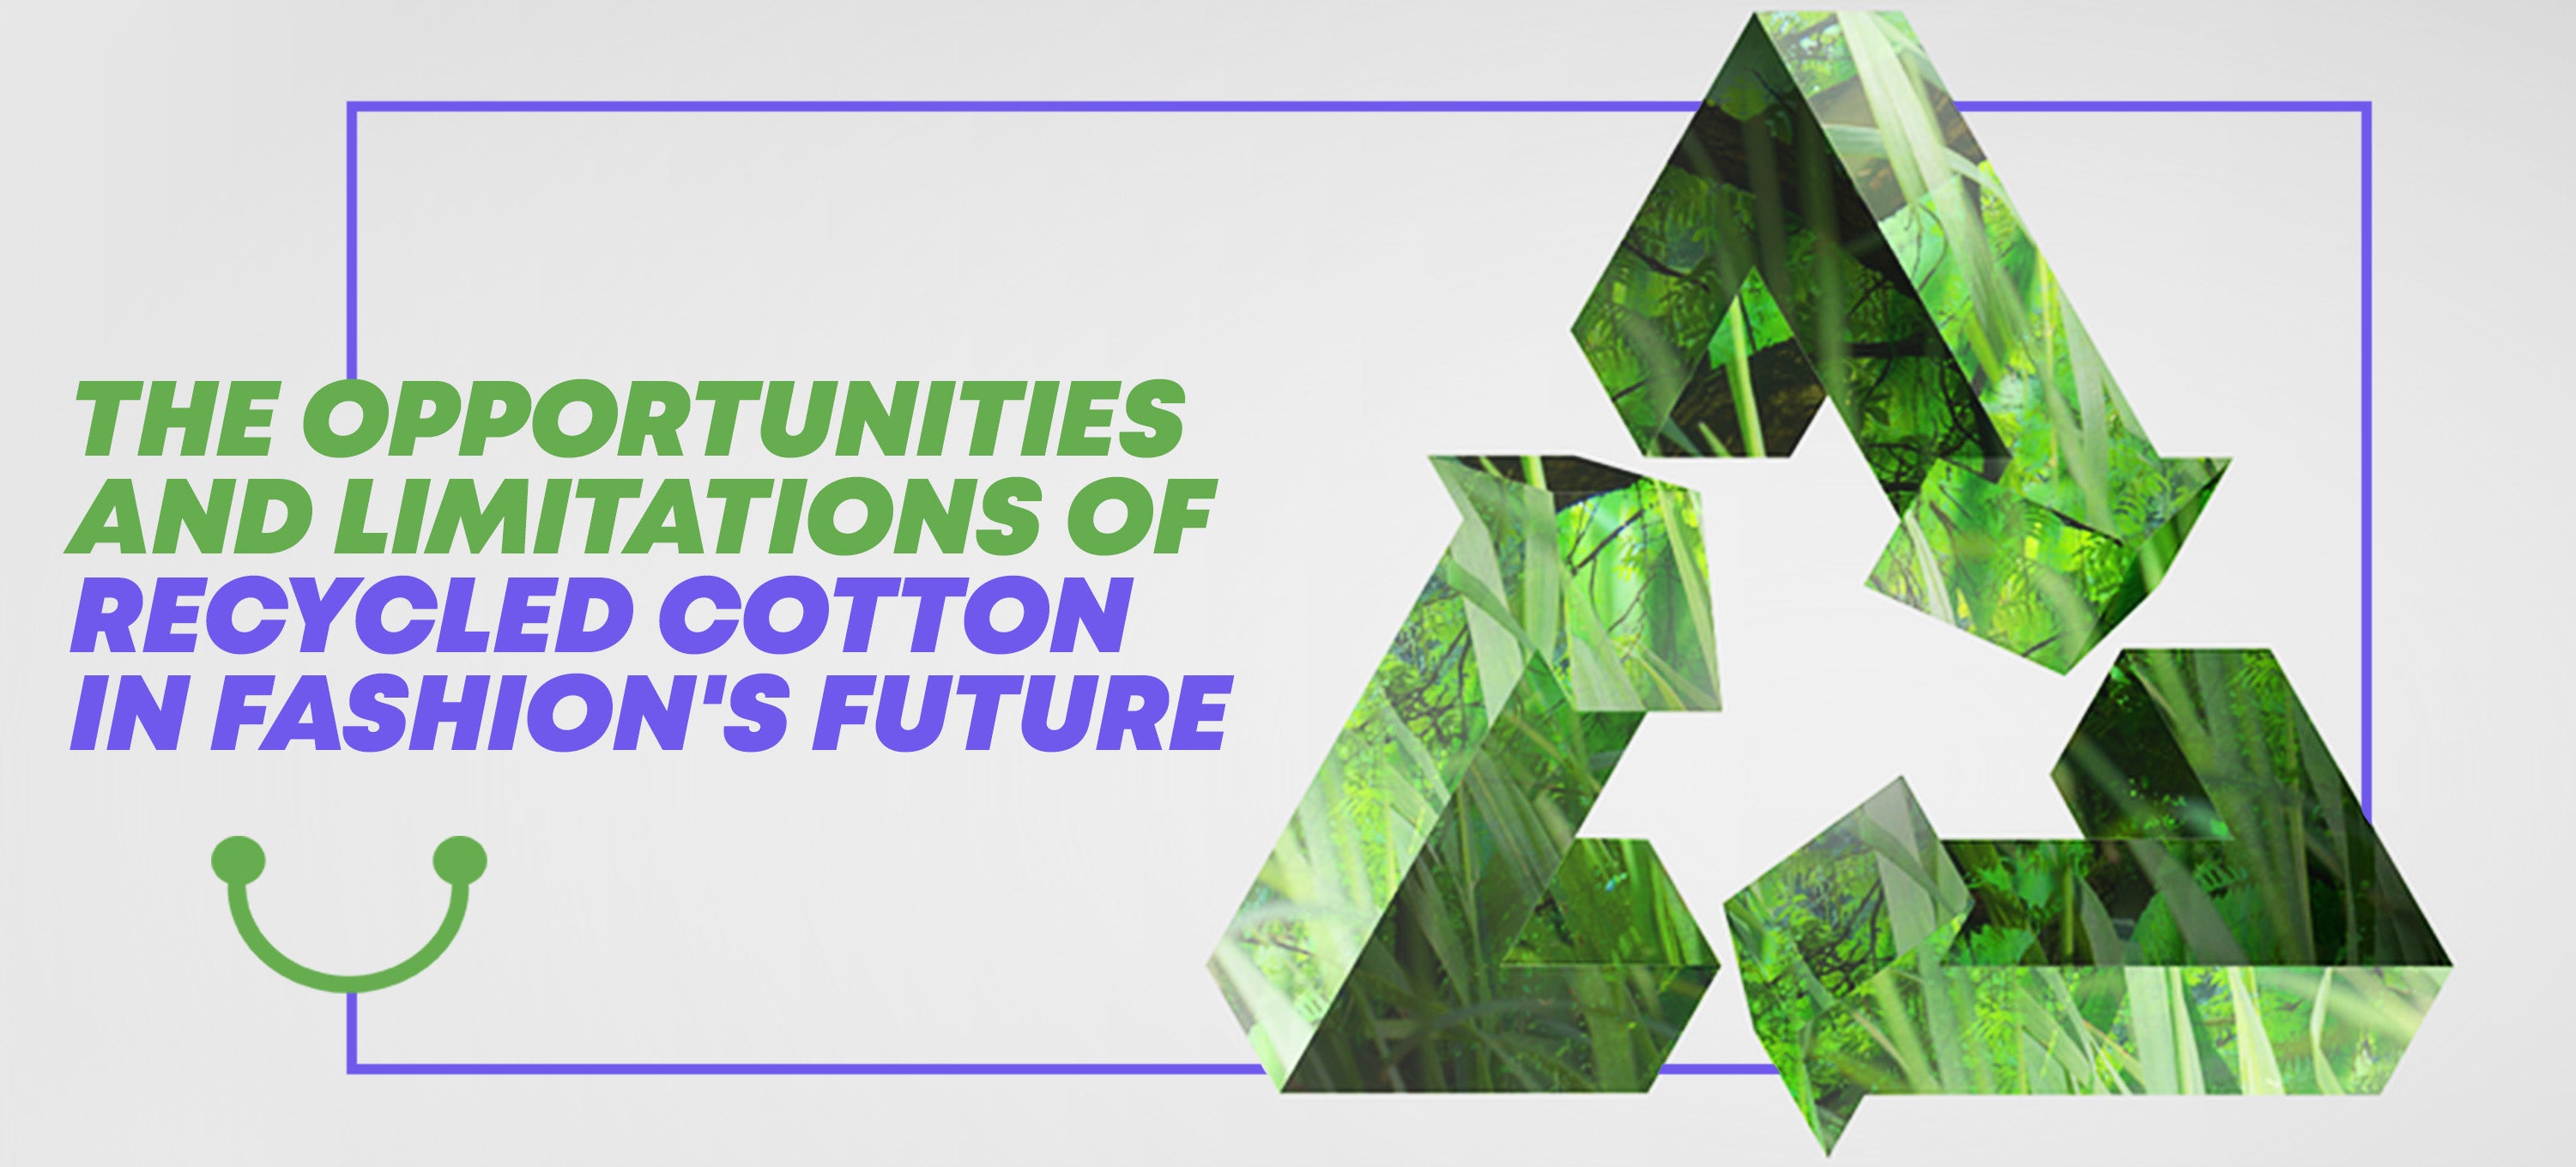 5 Uses of Recyclable Cotton